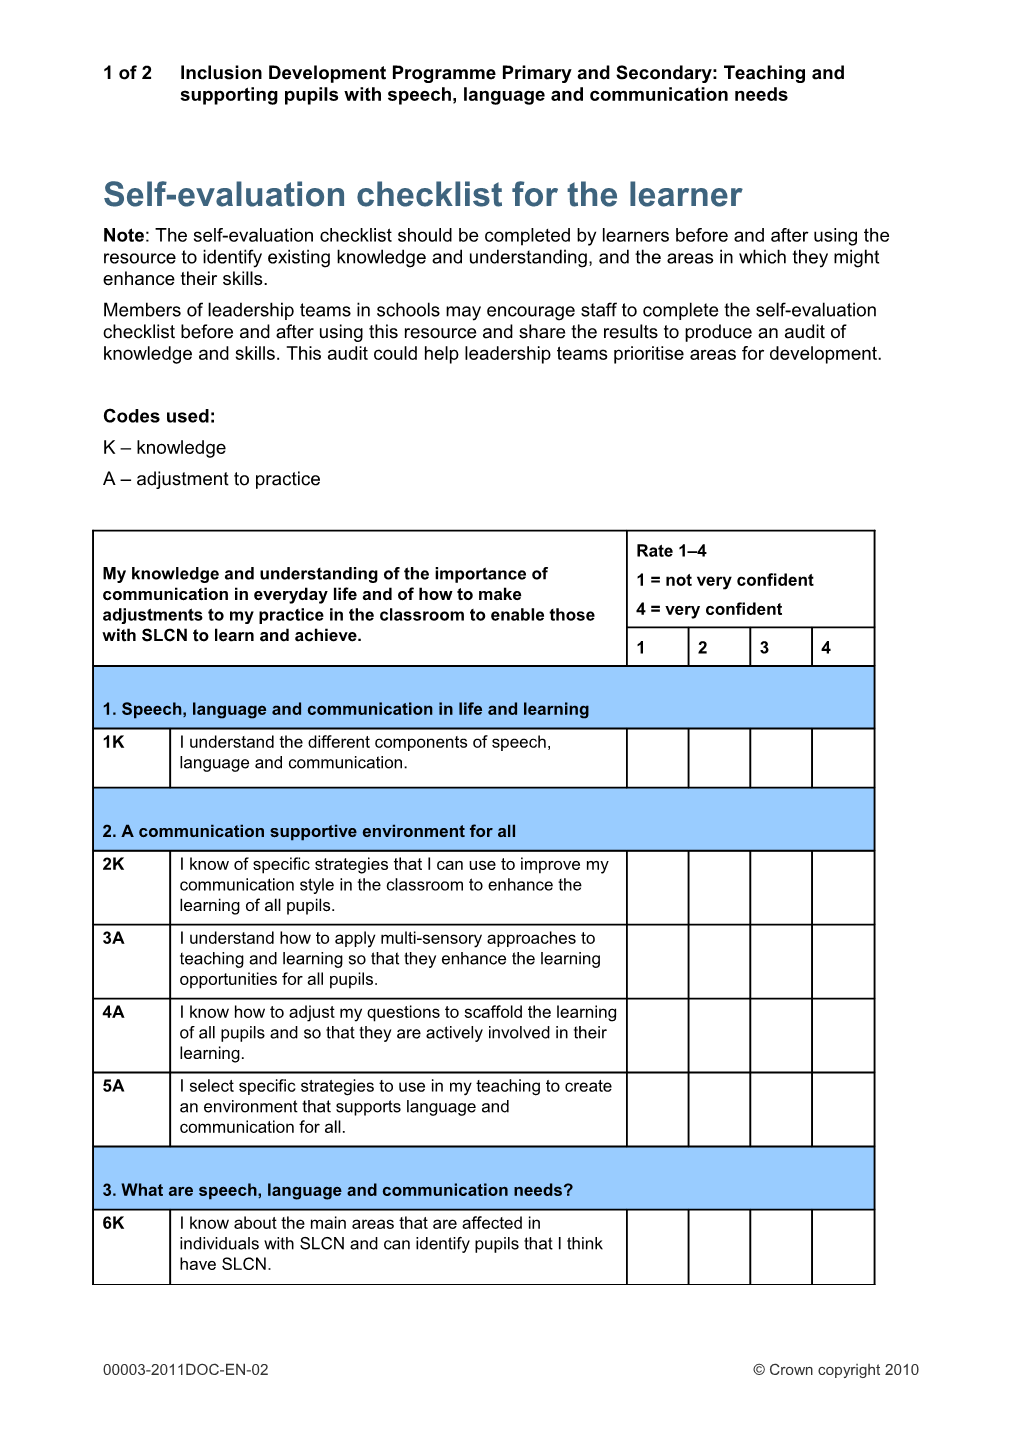 Self-Evaluation Checklist for the Learner